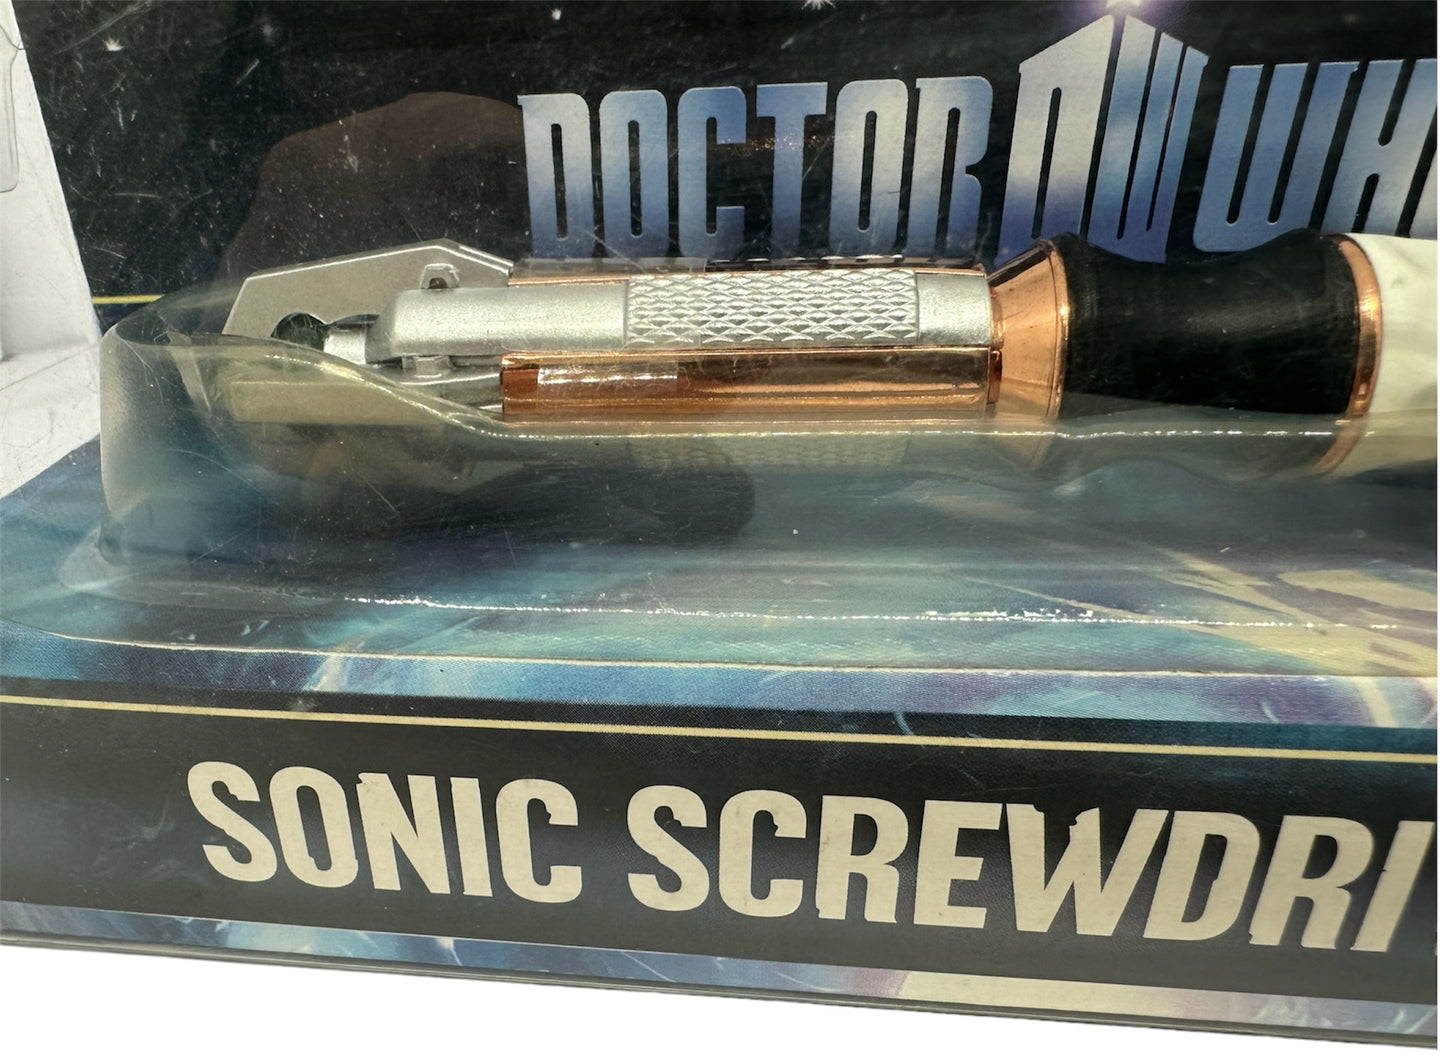 Vintage 2009 Dr Who The 11th Doctors Sonic Screwdriver Pen - Brand New Factory Sealed Shop Stock Room Find